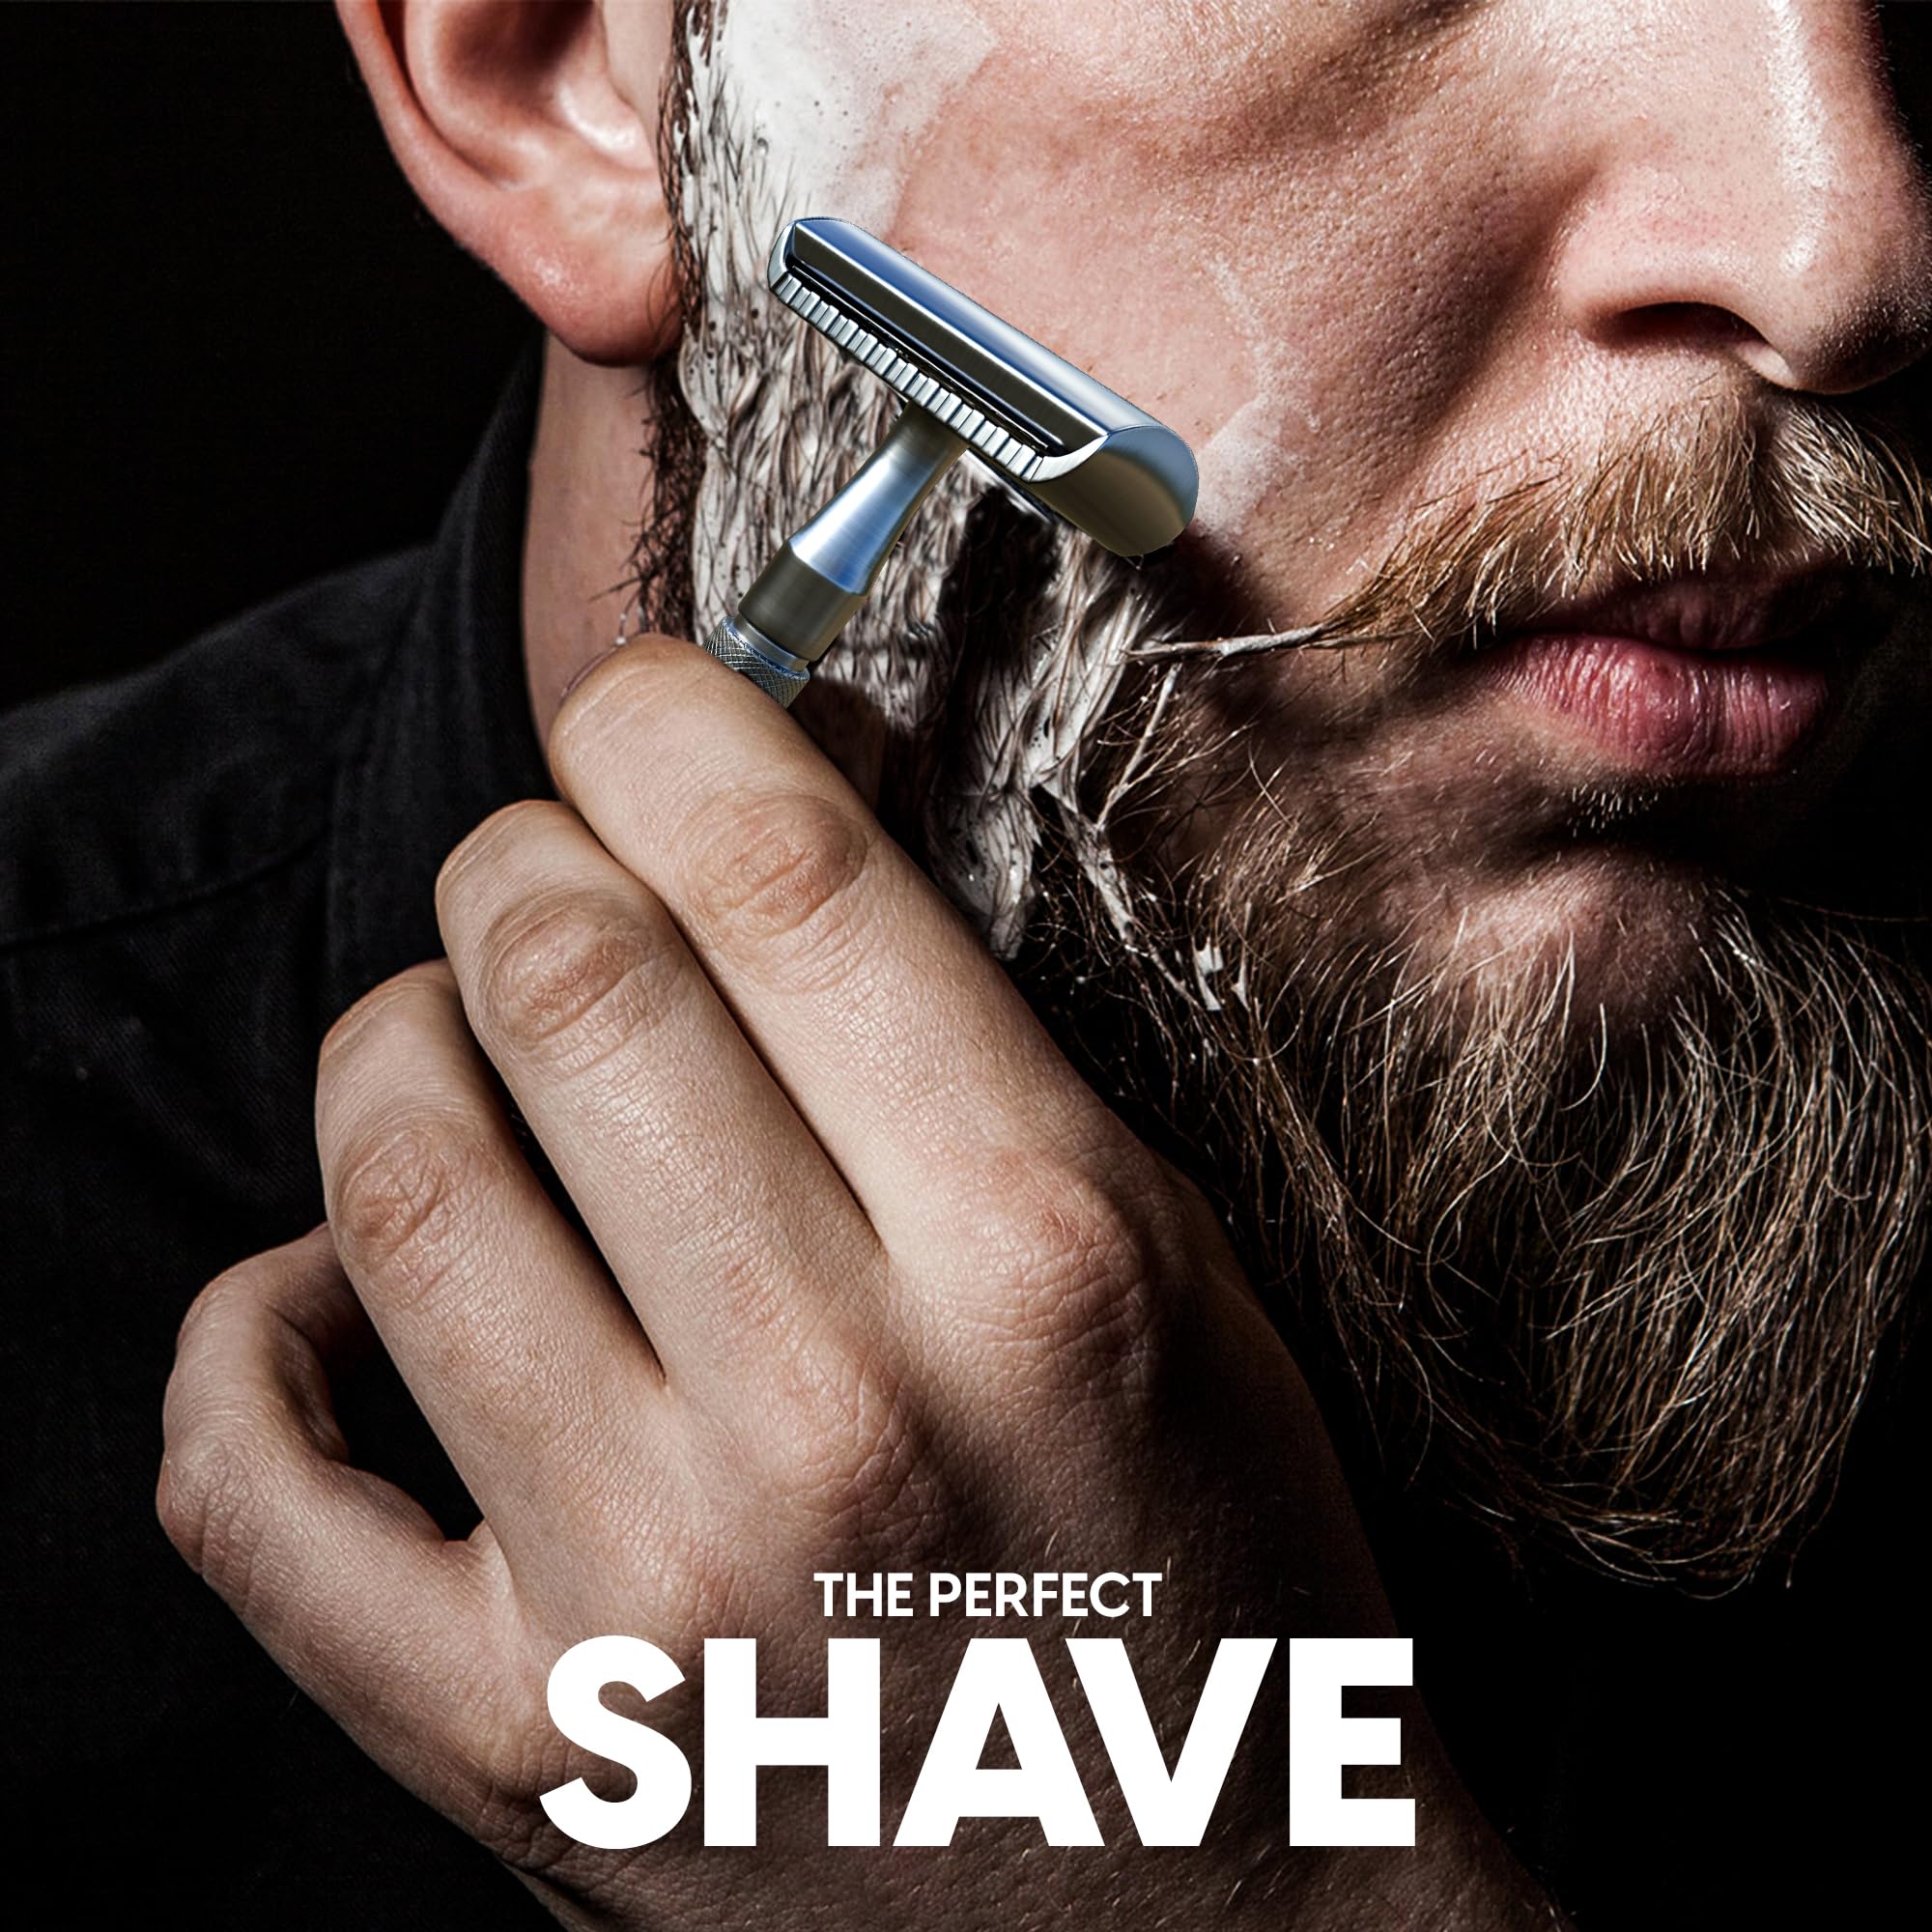 VETERAN OWNED COMPANY. Safety Razor, single blade, Chrome Double Edge Safety Razor, with 10 Platinum Coated Double Edge Safety Razor Blades. This shaver will last a lifetime.